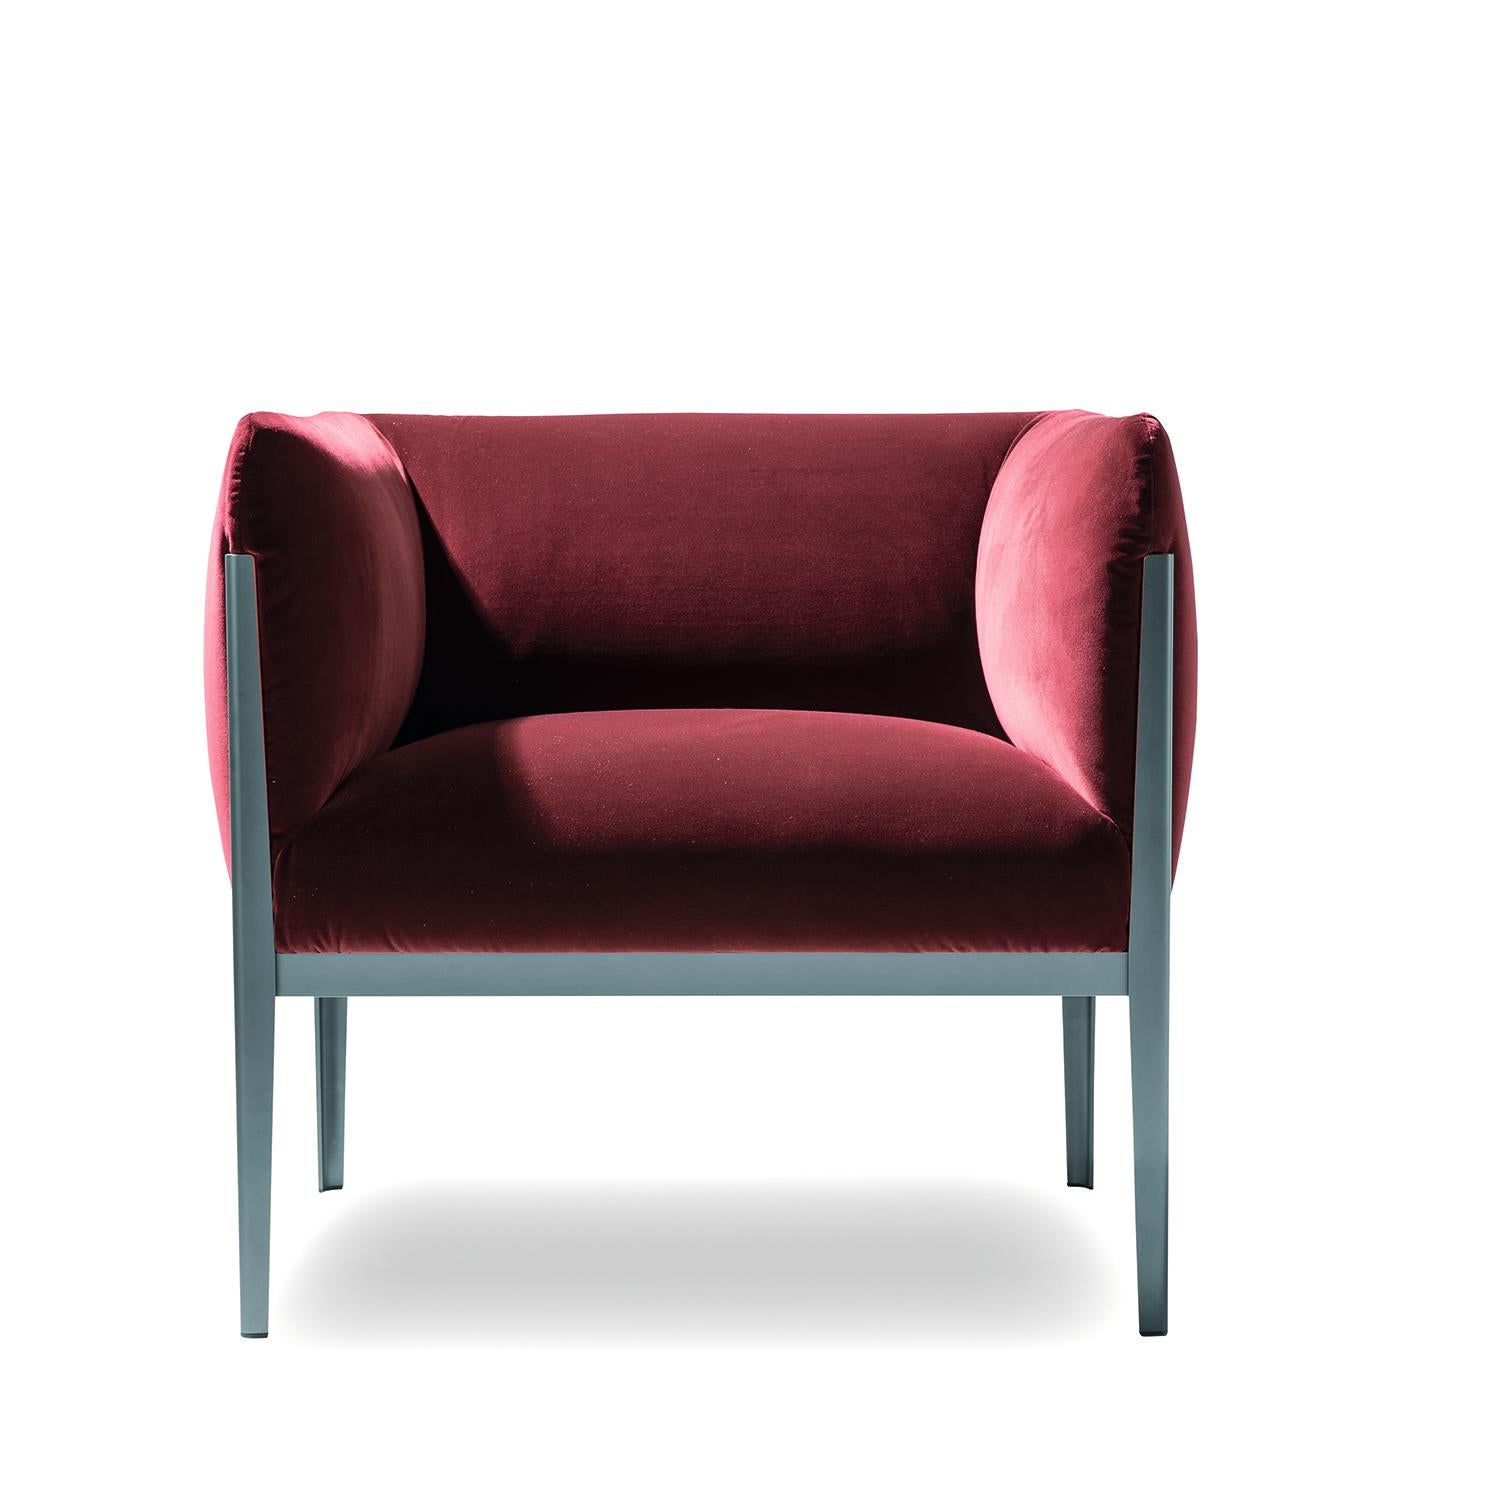 Italian Ronan & Erwan Bourroullec 'Cotone' Armchair, Aluminum and Fabric by Cassina For Sale